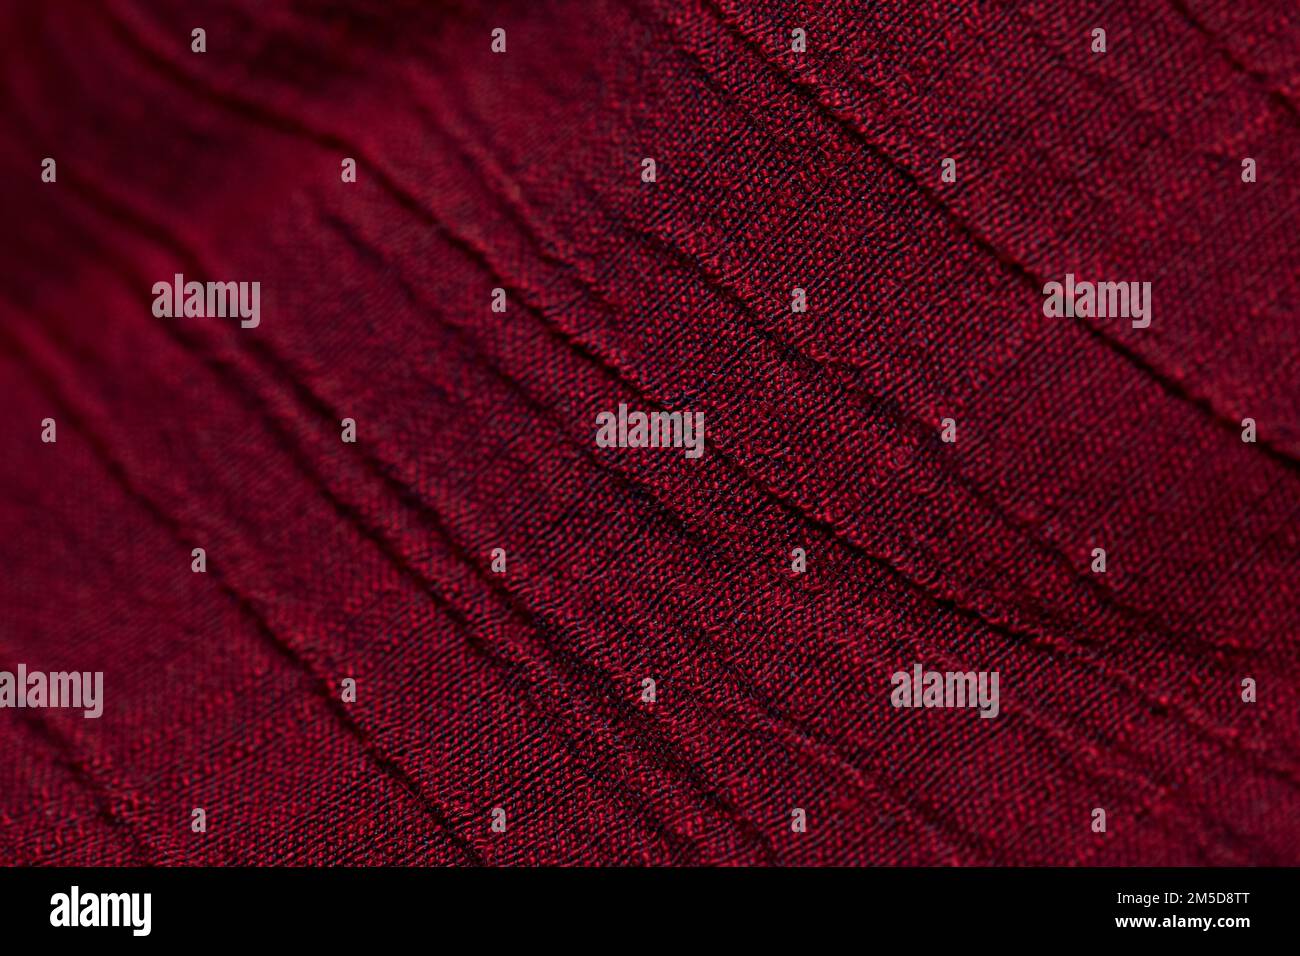 Red fabric background texture pattern. Red fabric cloth textile material. Stock Photo